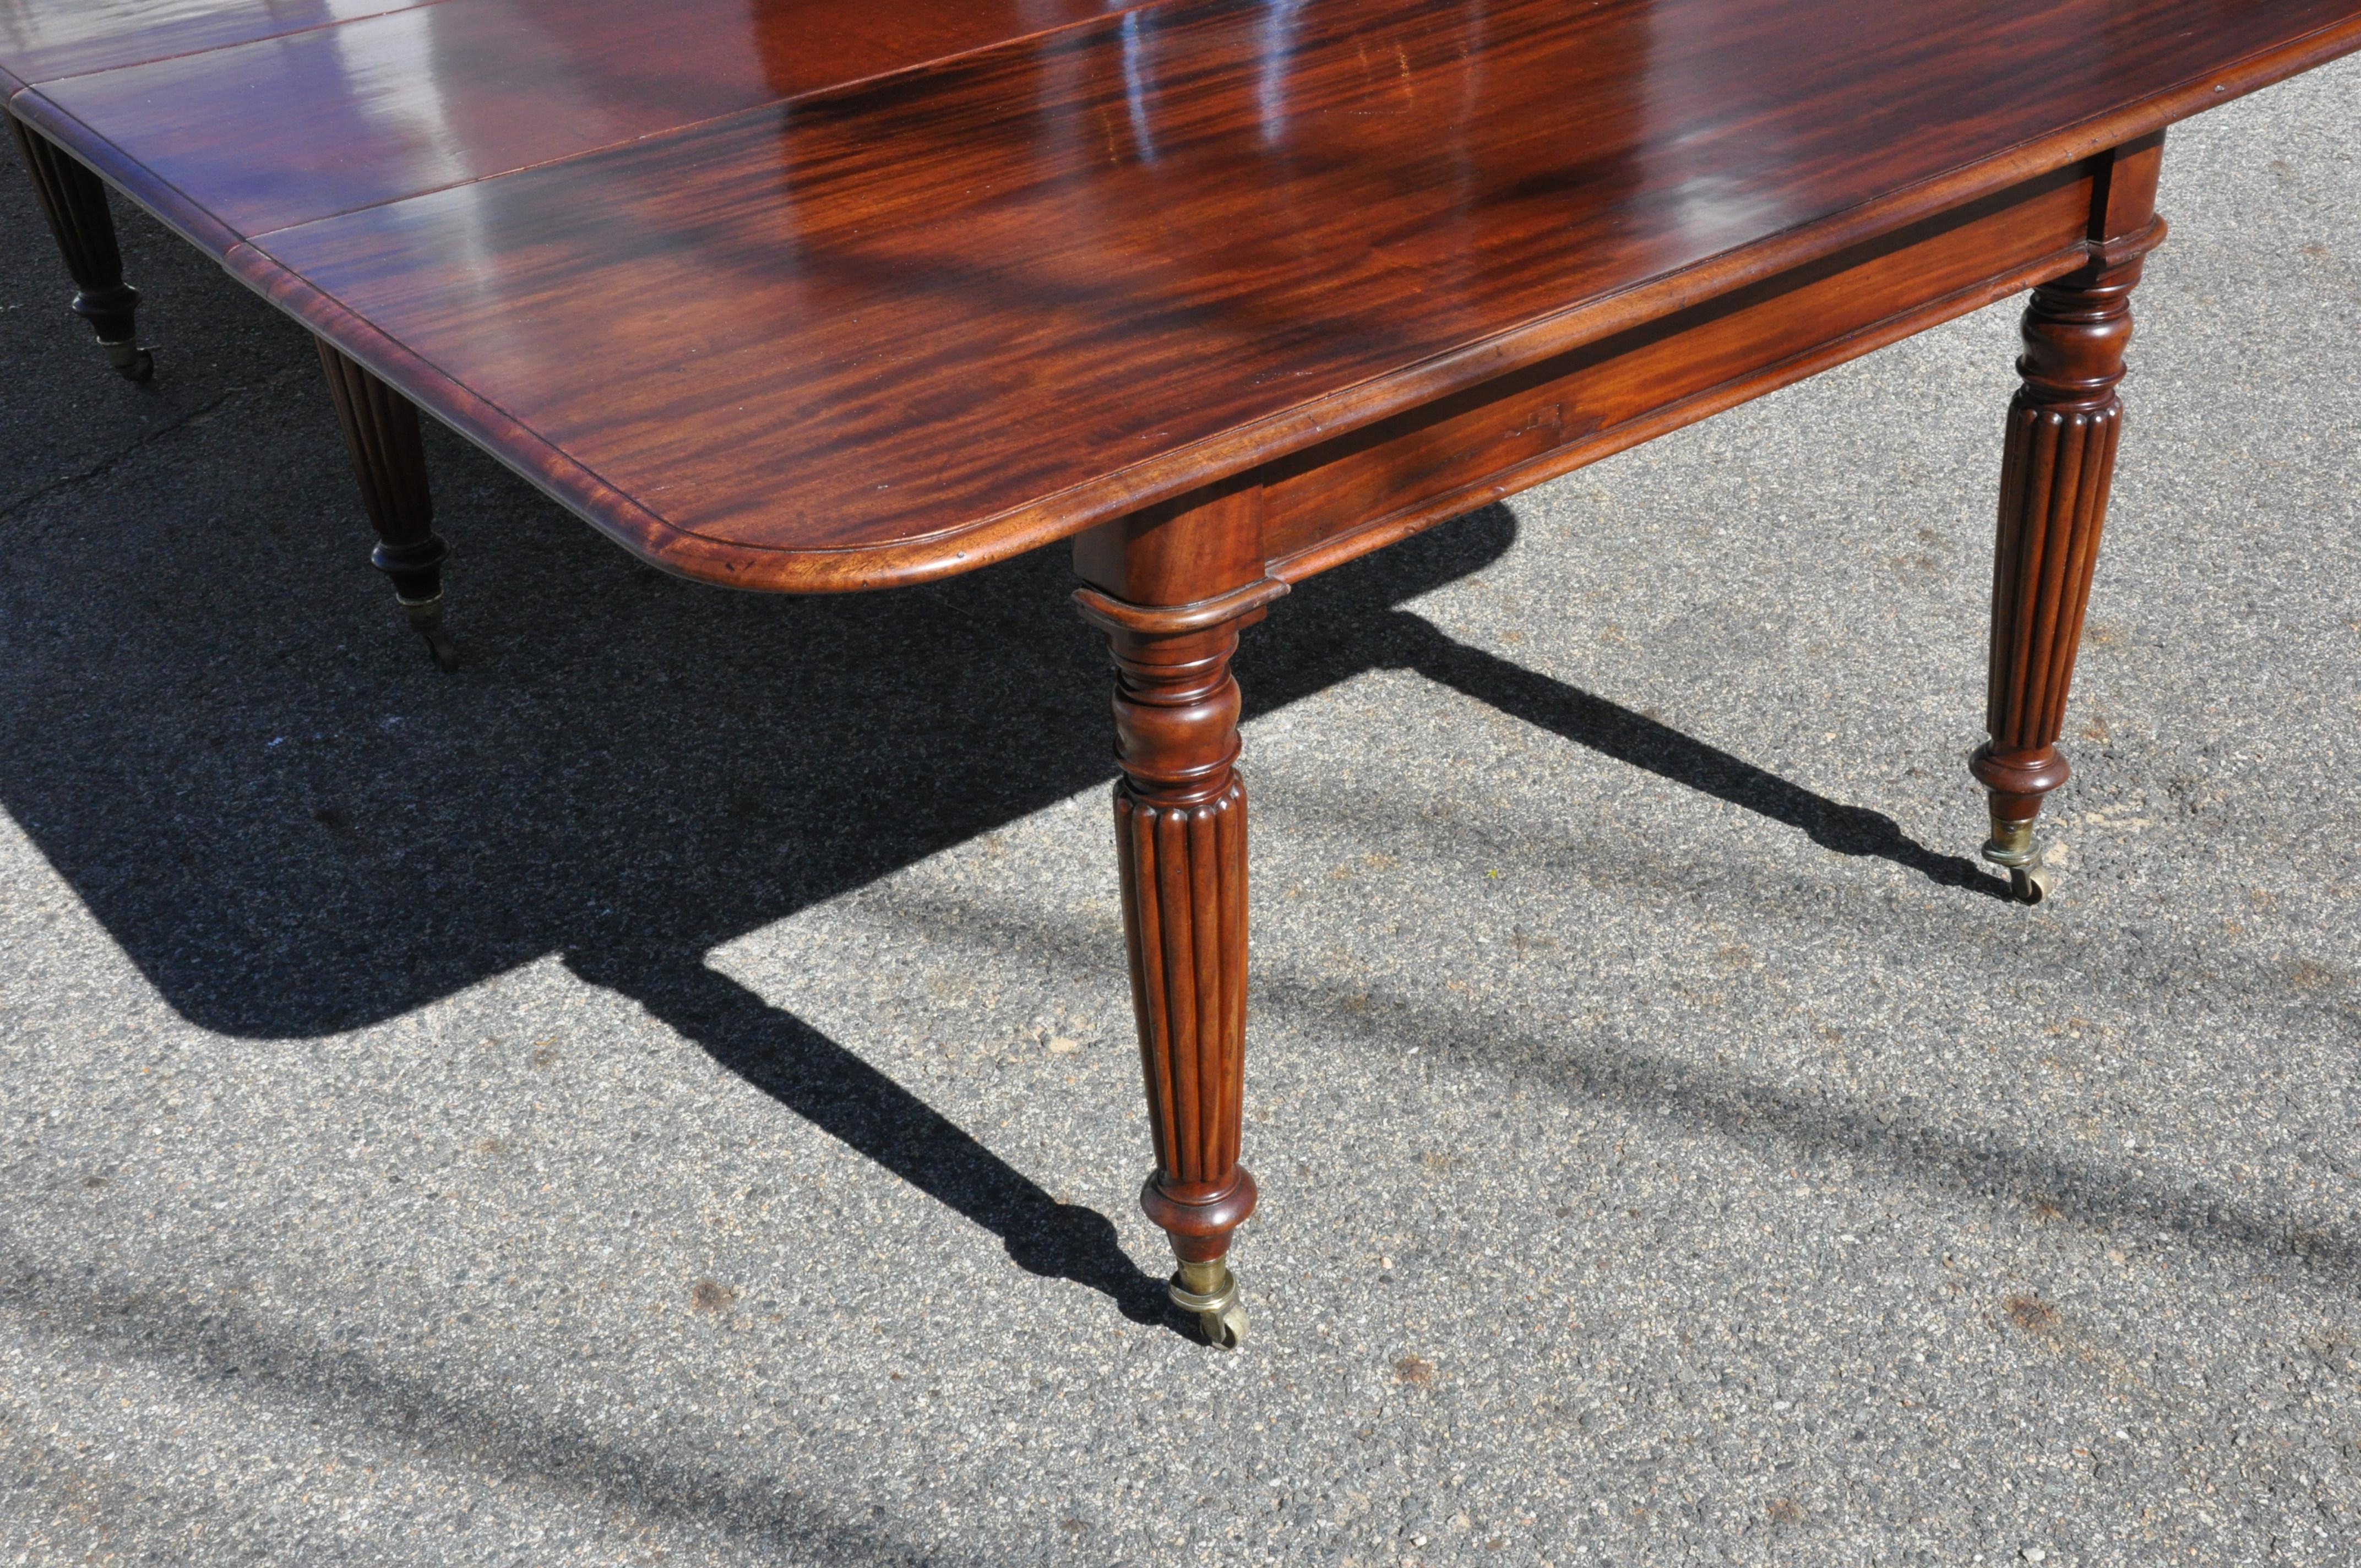 Period Early 19th Century Irish Regency Cuban Mahogany Dining Table In Good Condition For Sale In Essex, MA